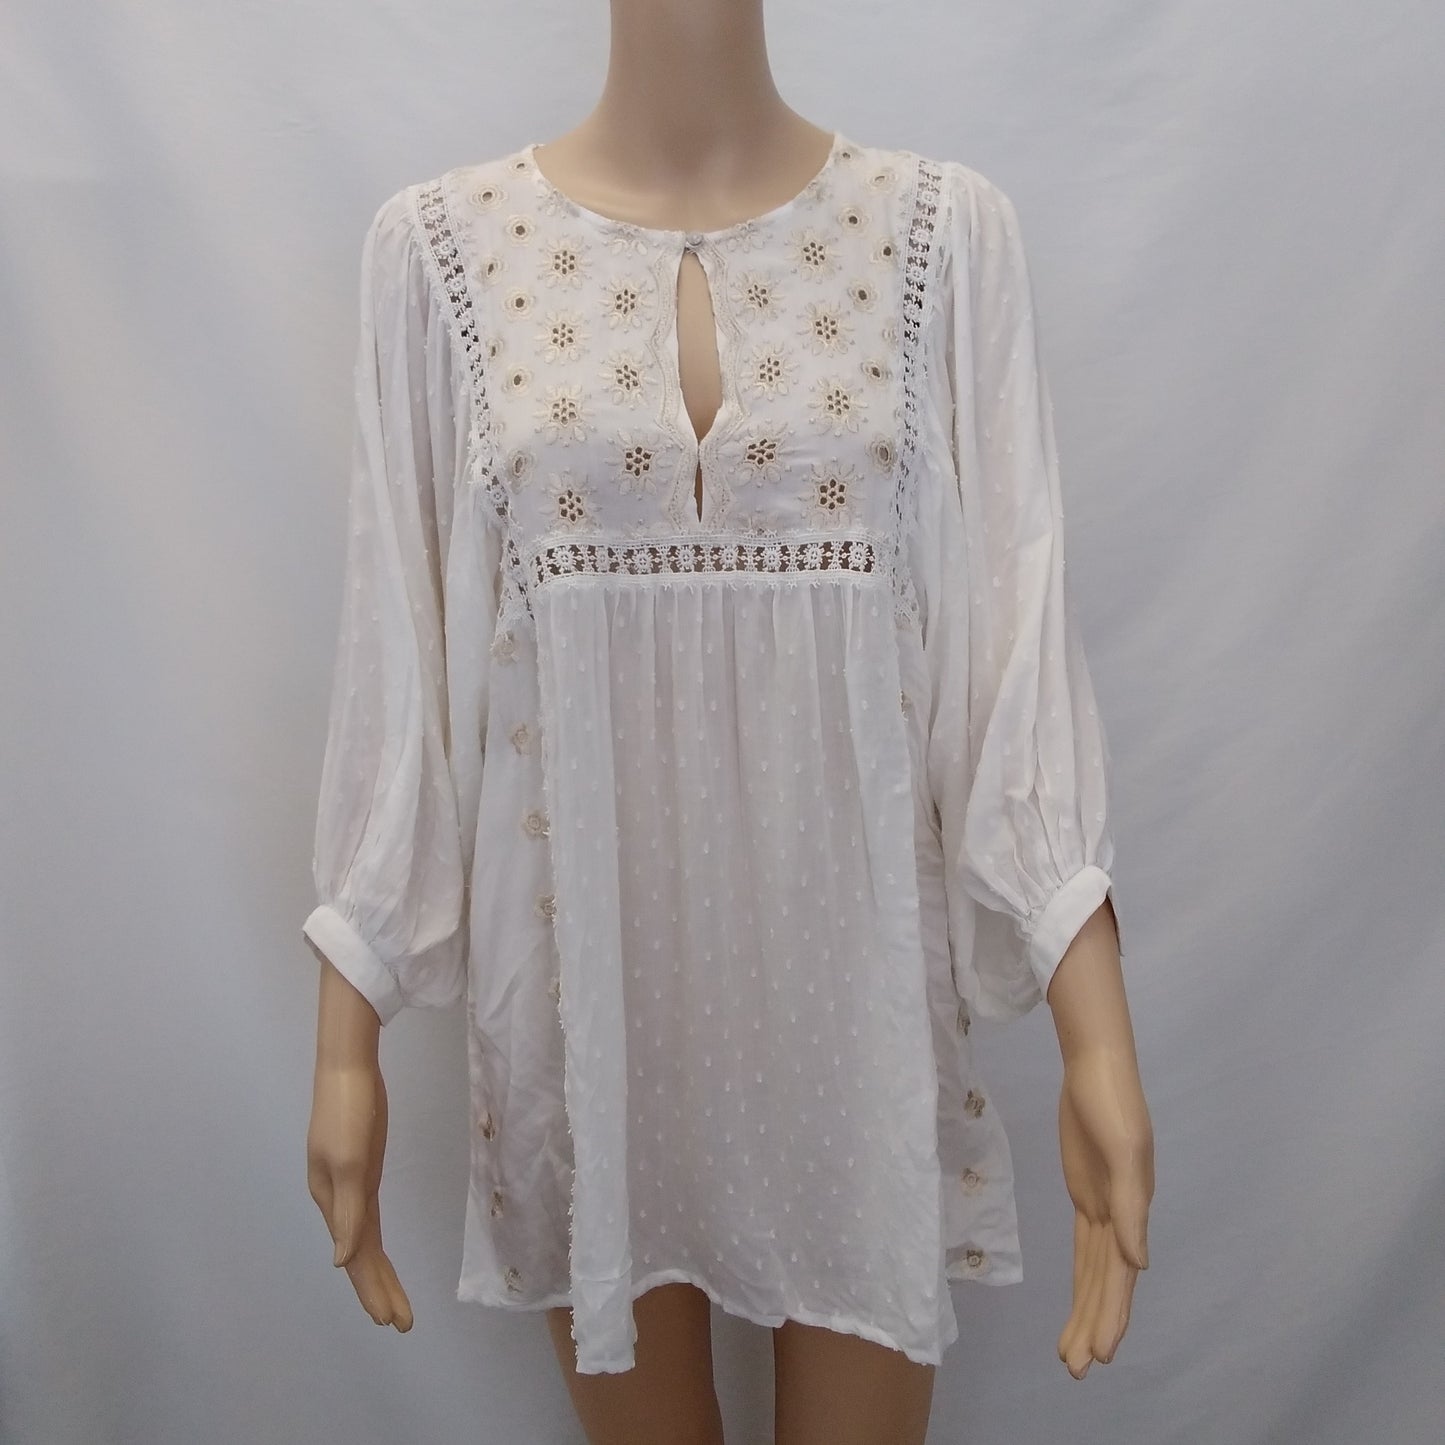 NWT - Free People Ivory Embroidered Keyhole Tunic Top - S